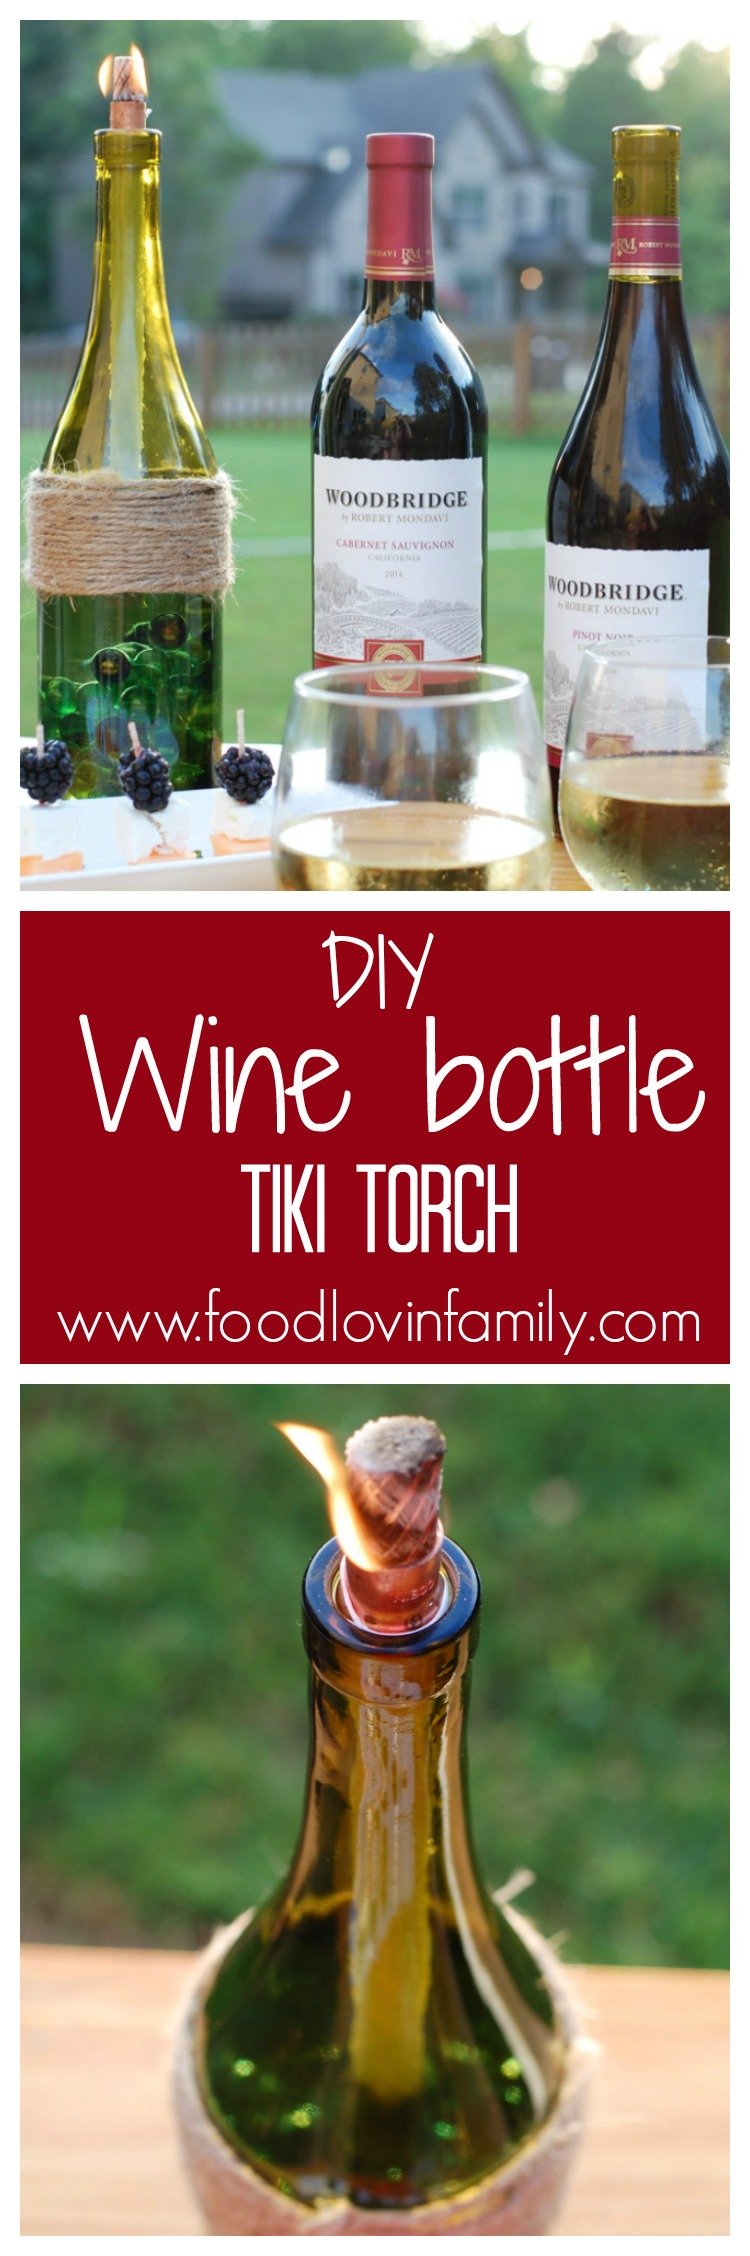 Turn your leftover wine bottles into beautiful backyard DIY wine bottle Tiki torches. They are a perfect way to recycle those old bottles and keep away the bugs from your backyard entertaining area.